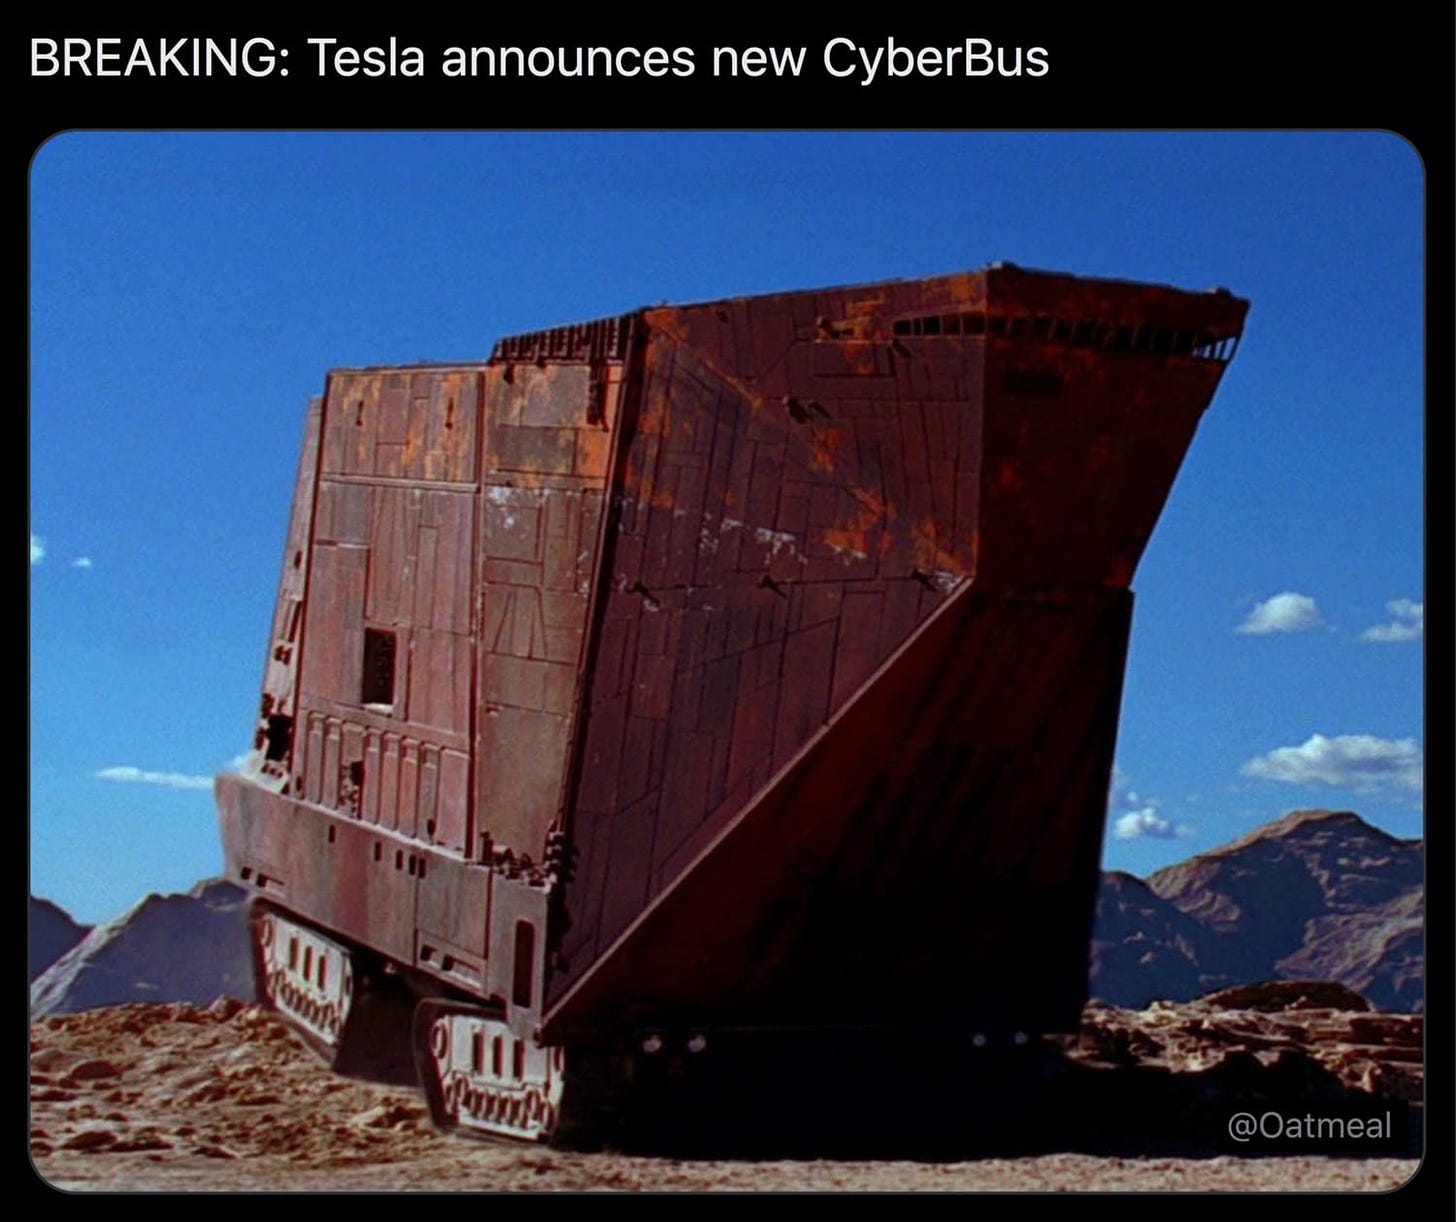 picture of jawas sandcrawler from star wars

caption: 
breaking: tesla announces new cyberbus